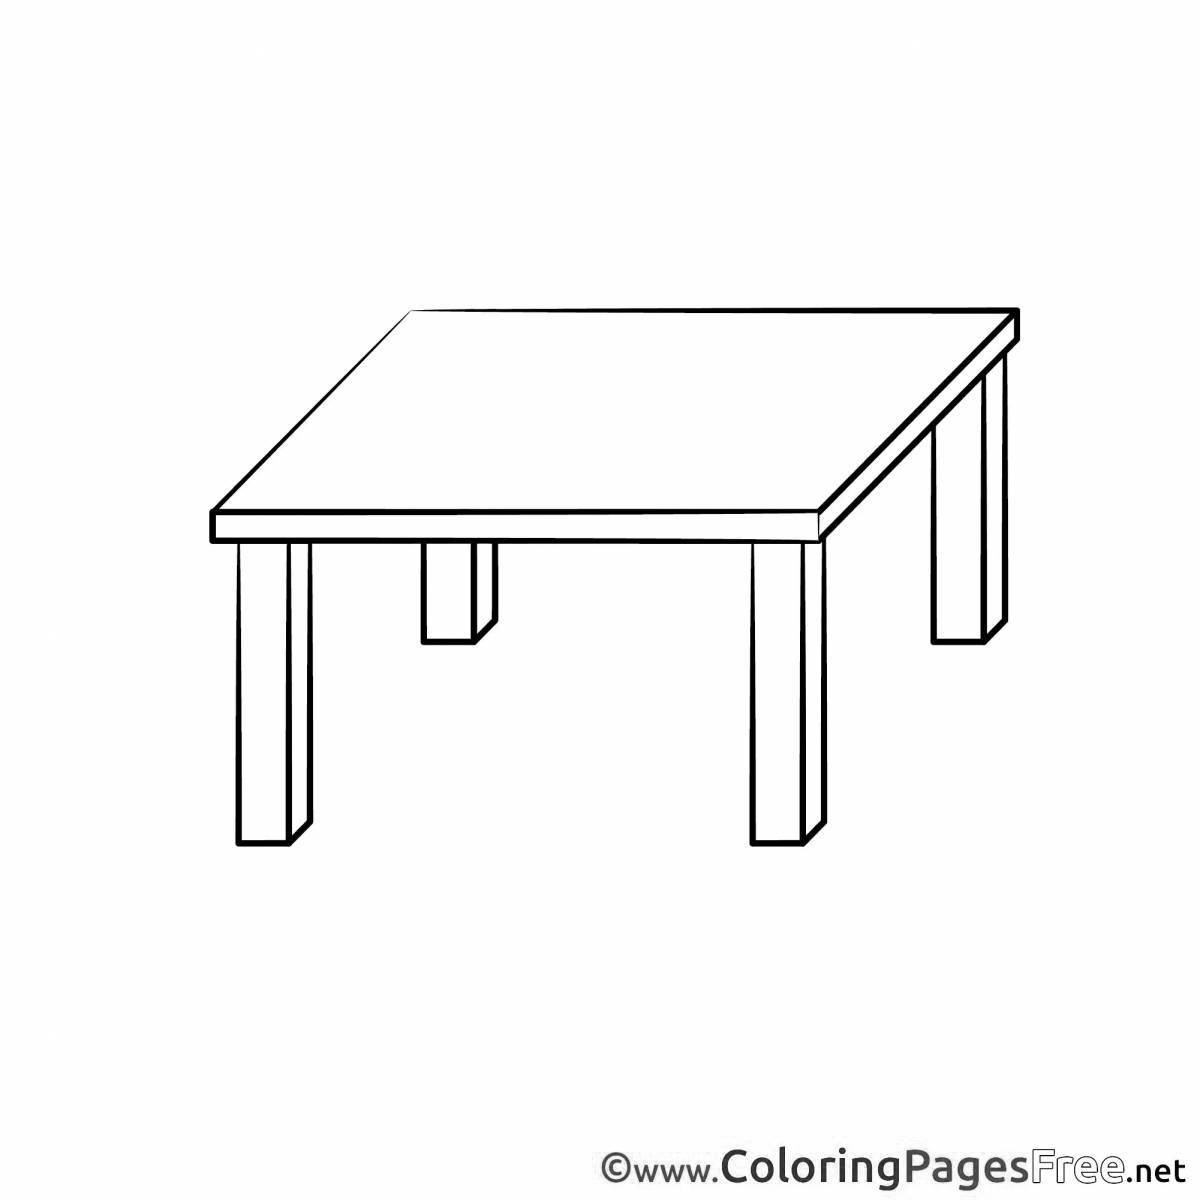 Coloring book joyful table for children 4-5 years old